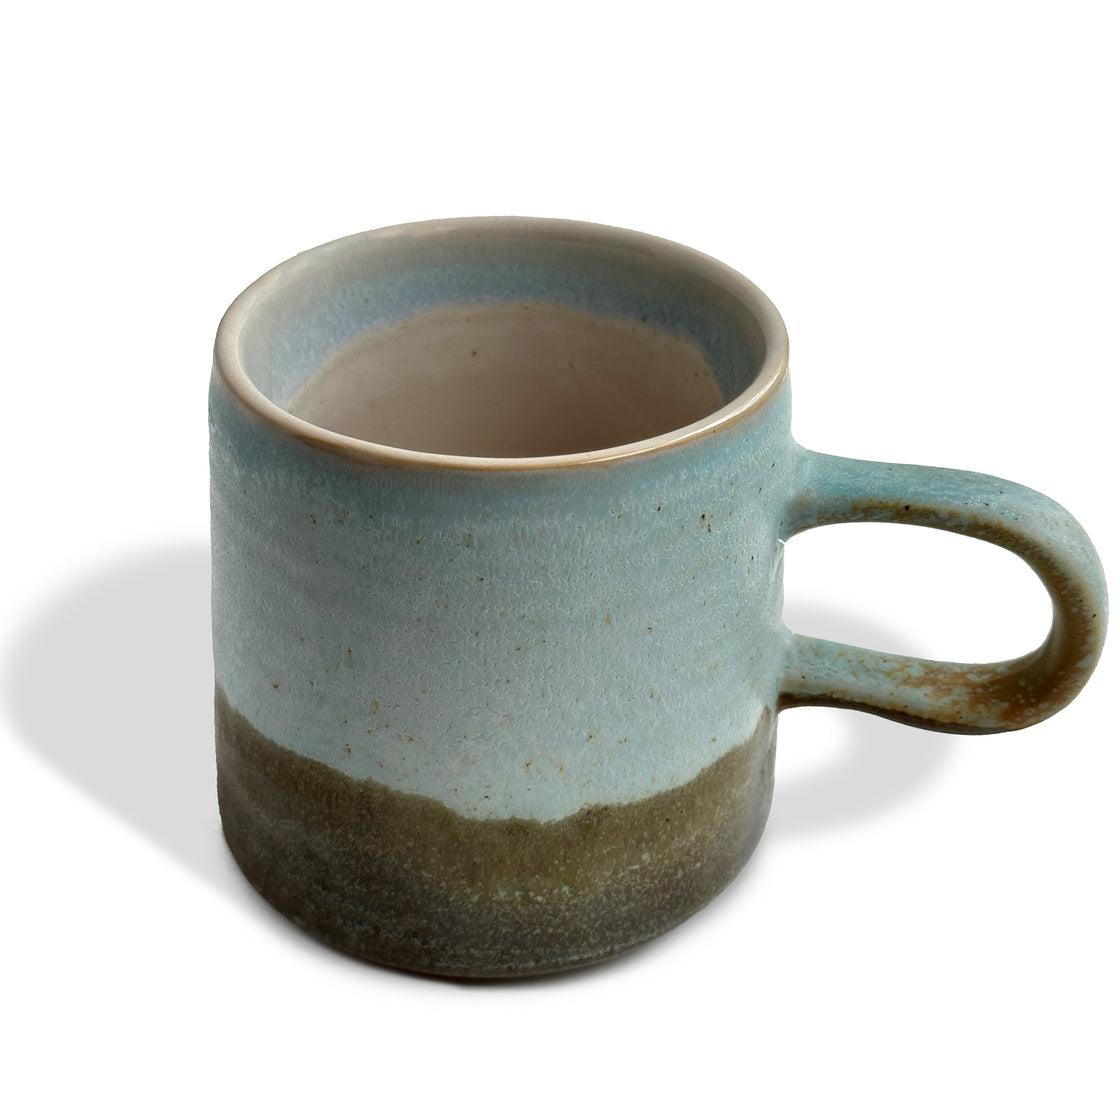 Stunning stoneware mugs both exquisite and long-lasting This set of four features subtle blue and green hues and holds 8 oz They are safe for use in the dishwasher and microwave showcased against a clean white background